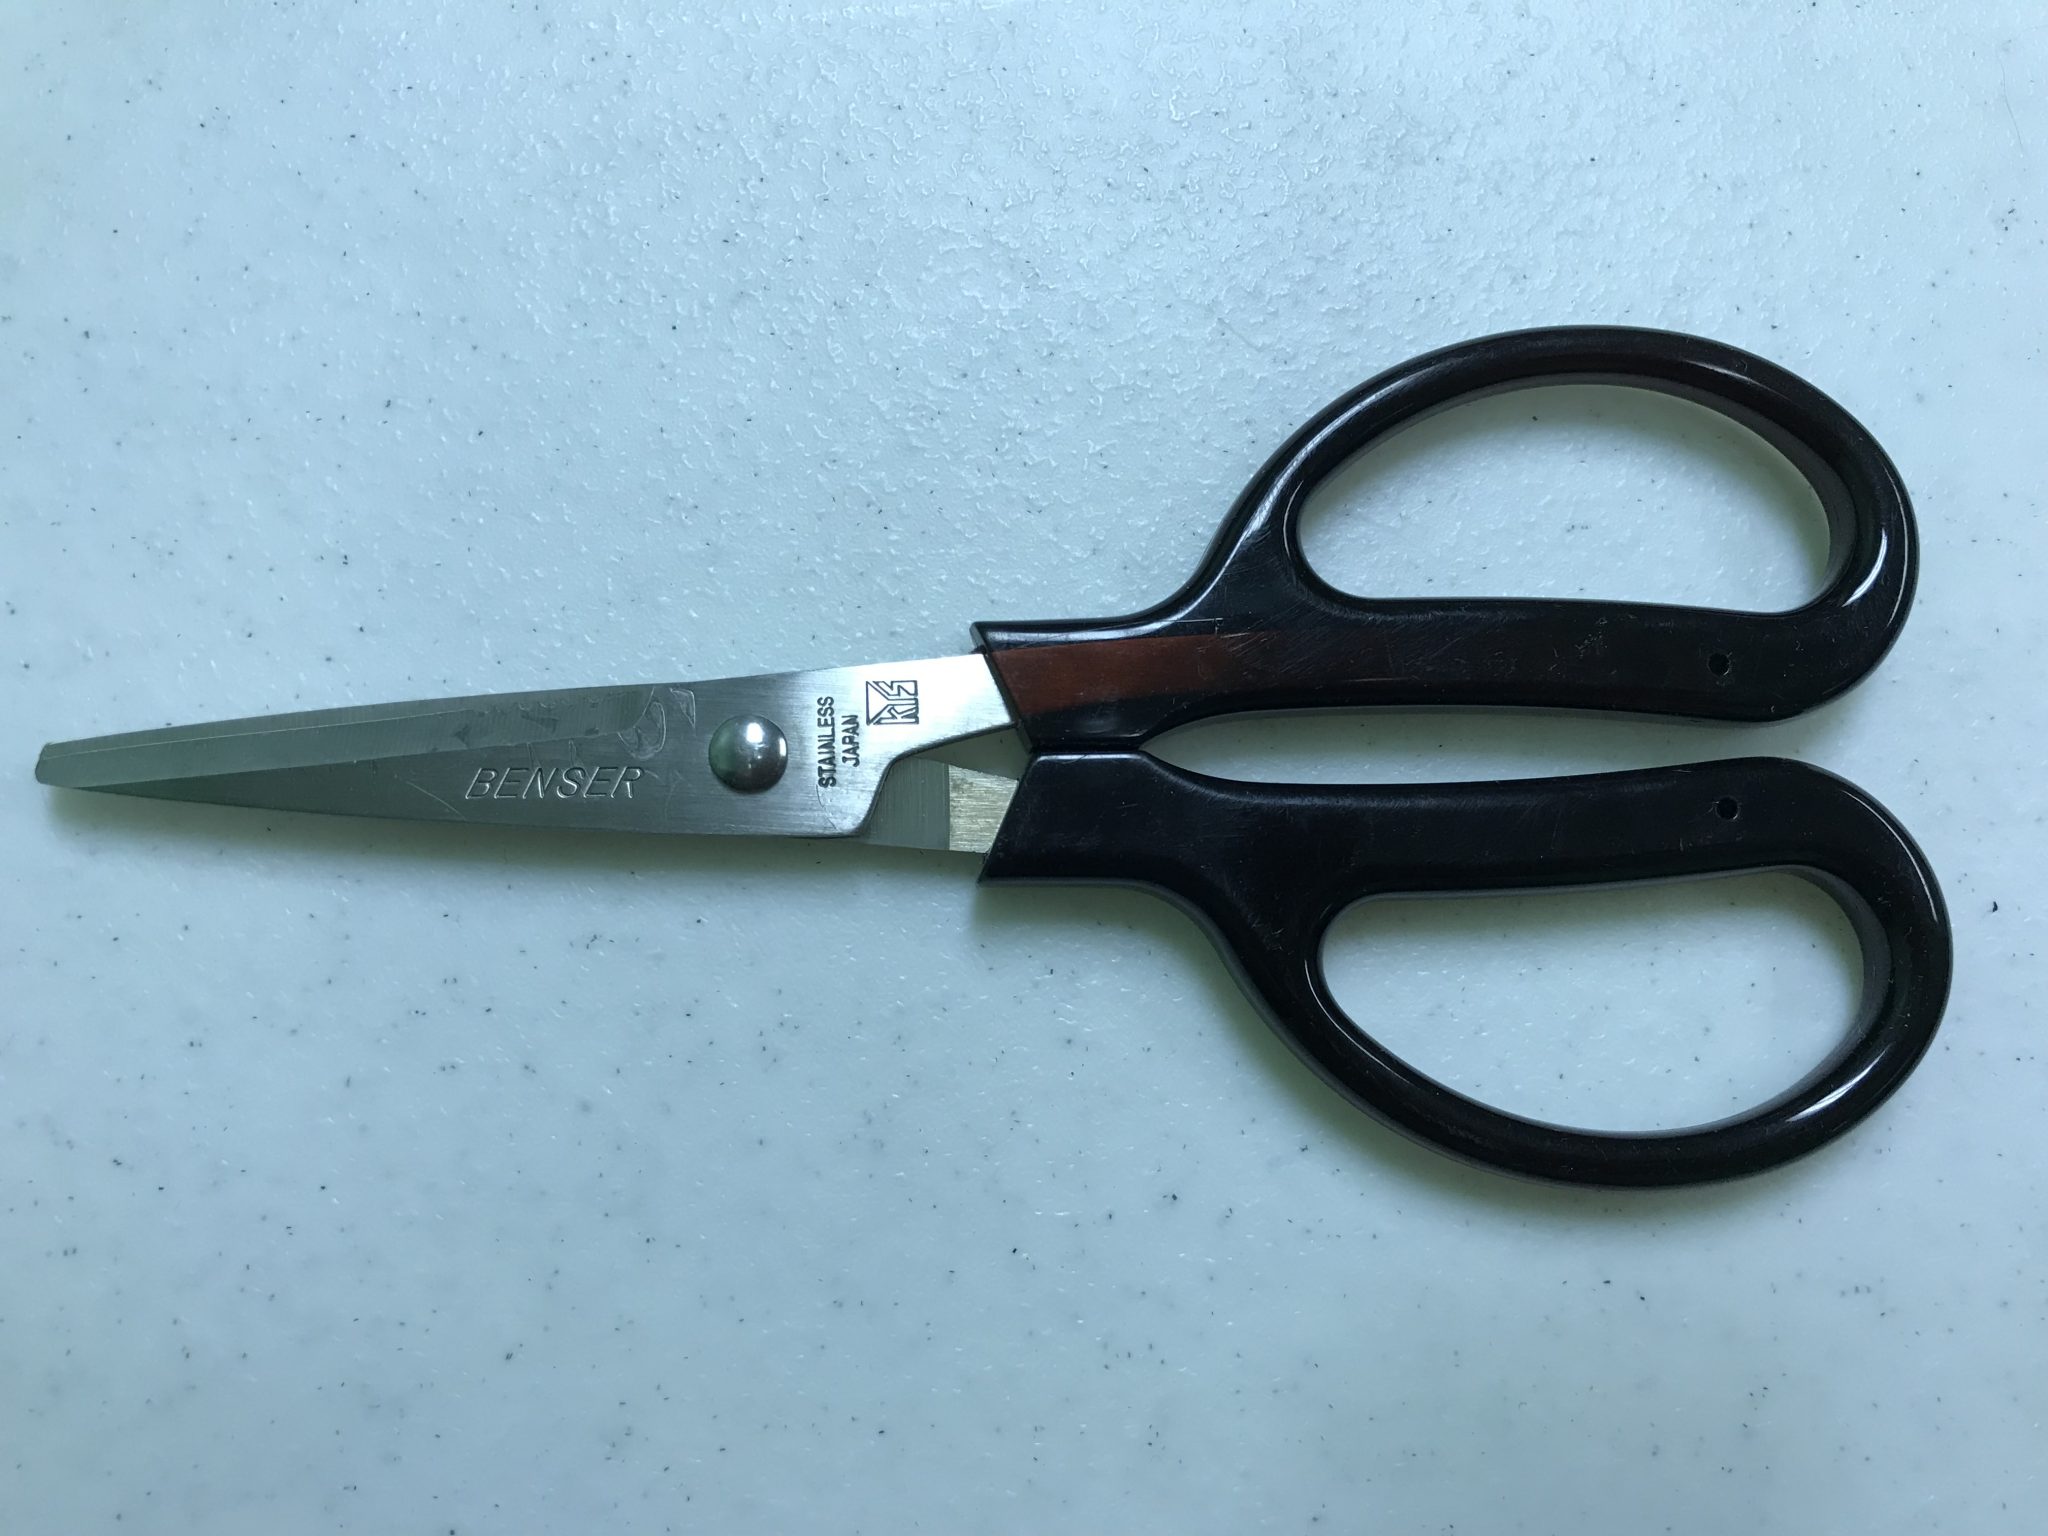 7 STAINLESS STEEL ULTIMATE BAIT SHEARS